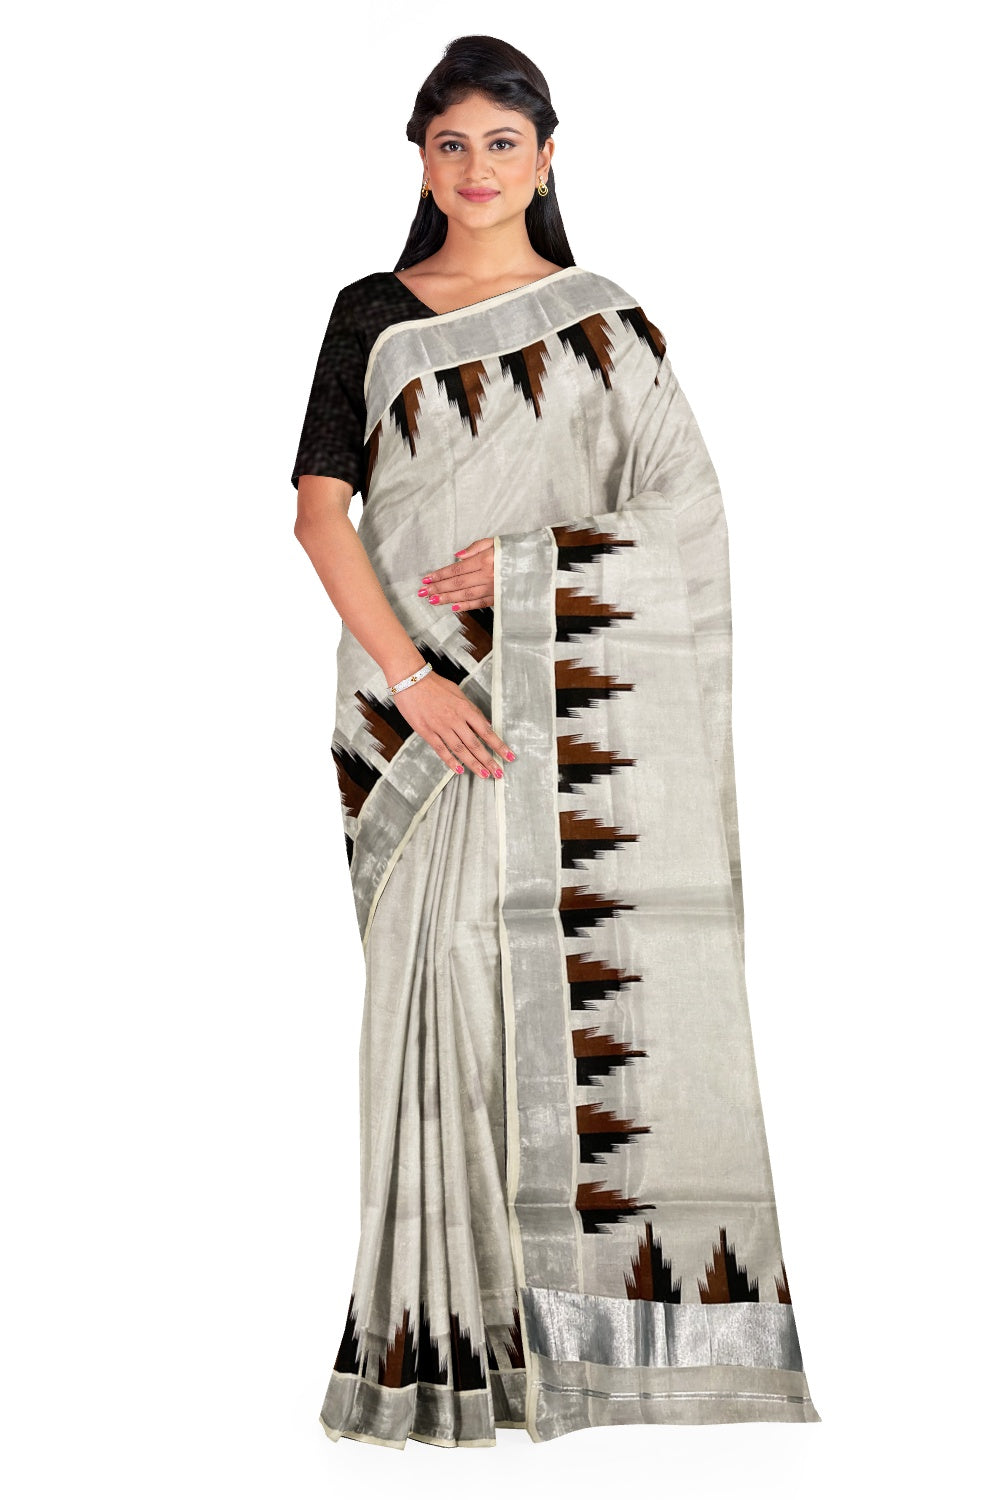 Kerala Silver Tissue Saree with Black and Brown Temple Print